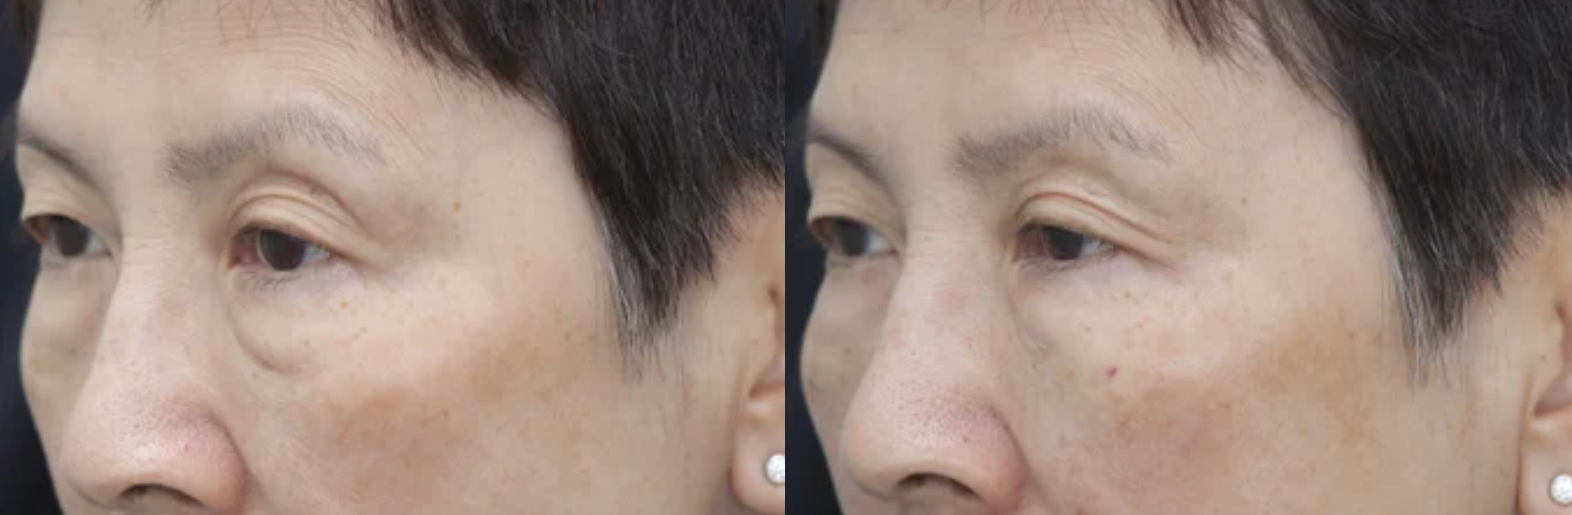 64-year-old woman receives Belotero fillers to address volume loss.